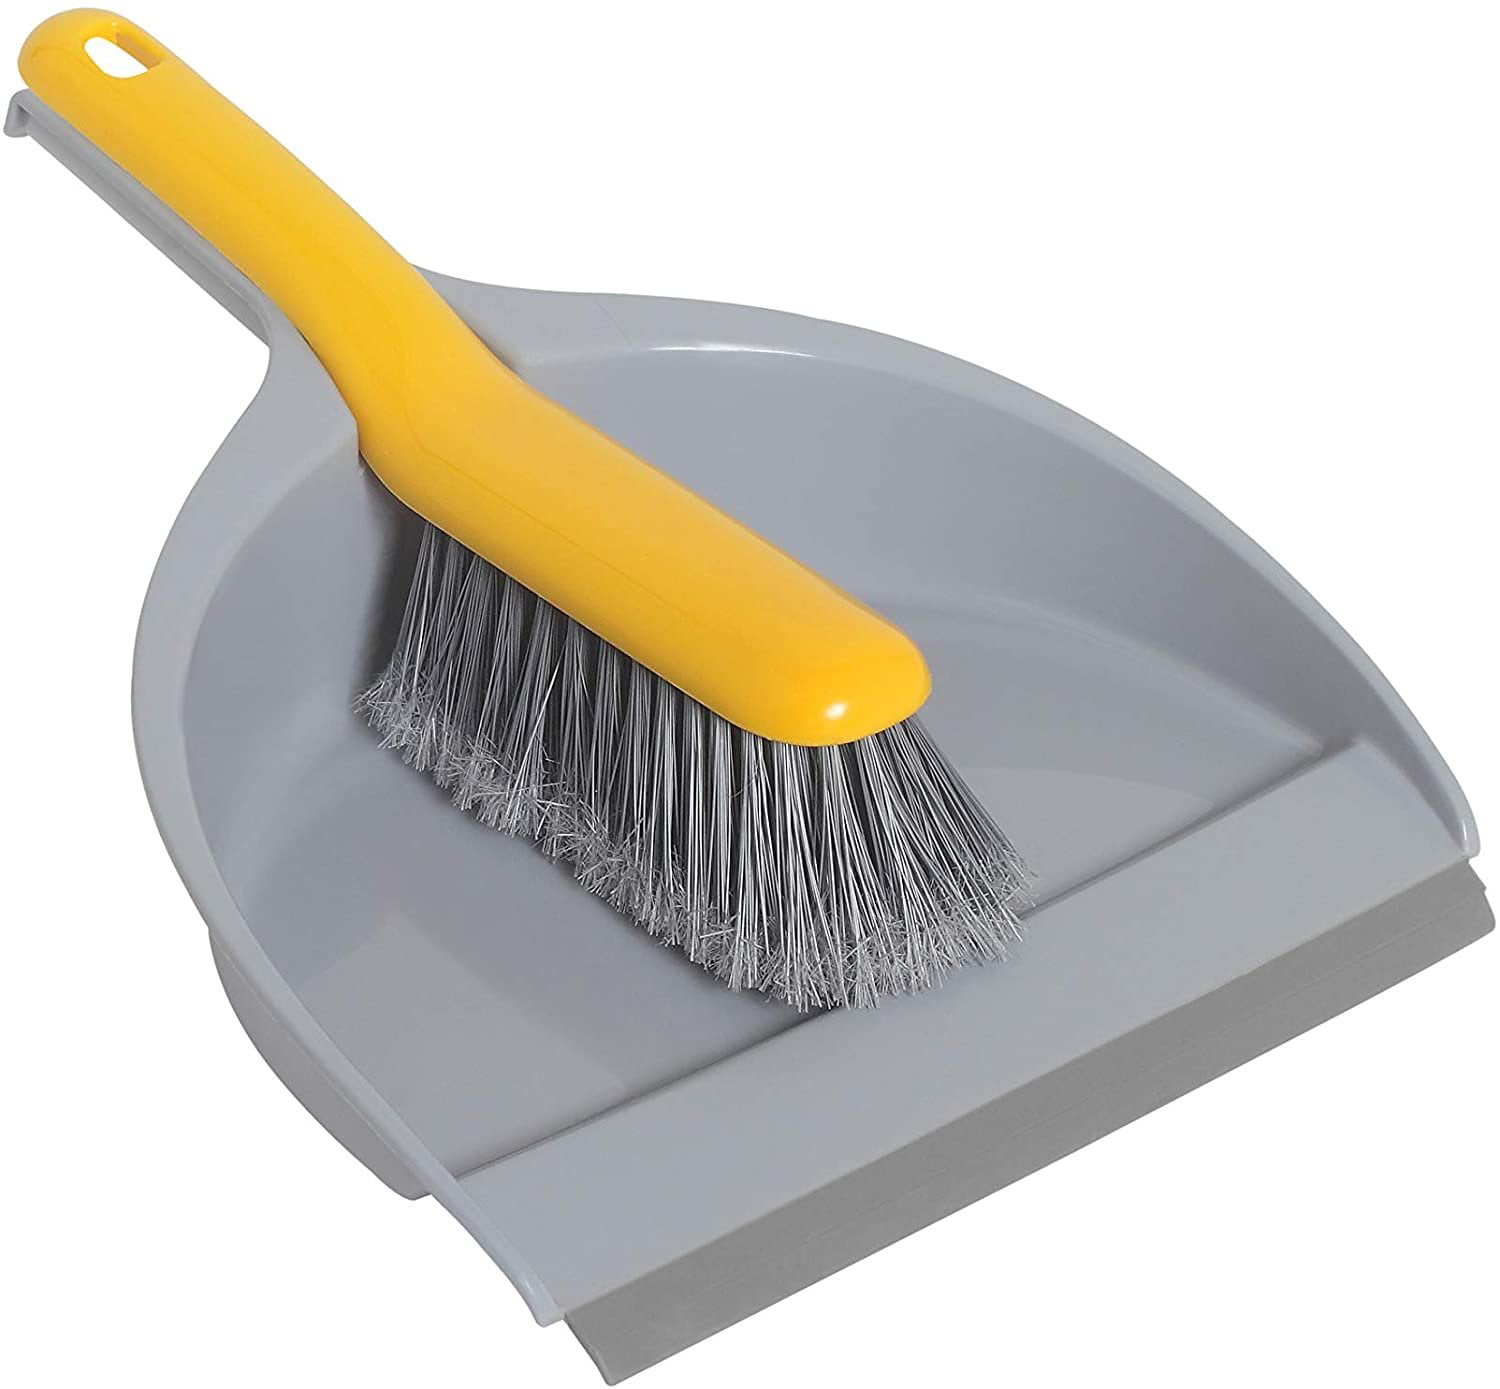 TIVIT Dustpan with Brush Classic Dustpan with Mini Hand Brush Small Broom Snapon Set, Indoor